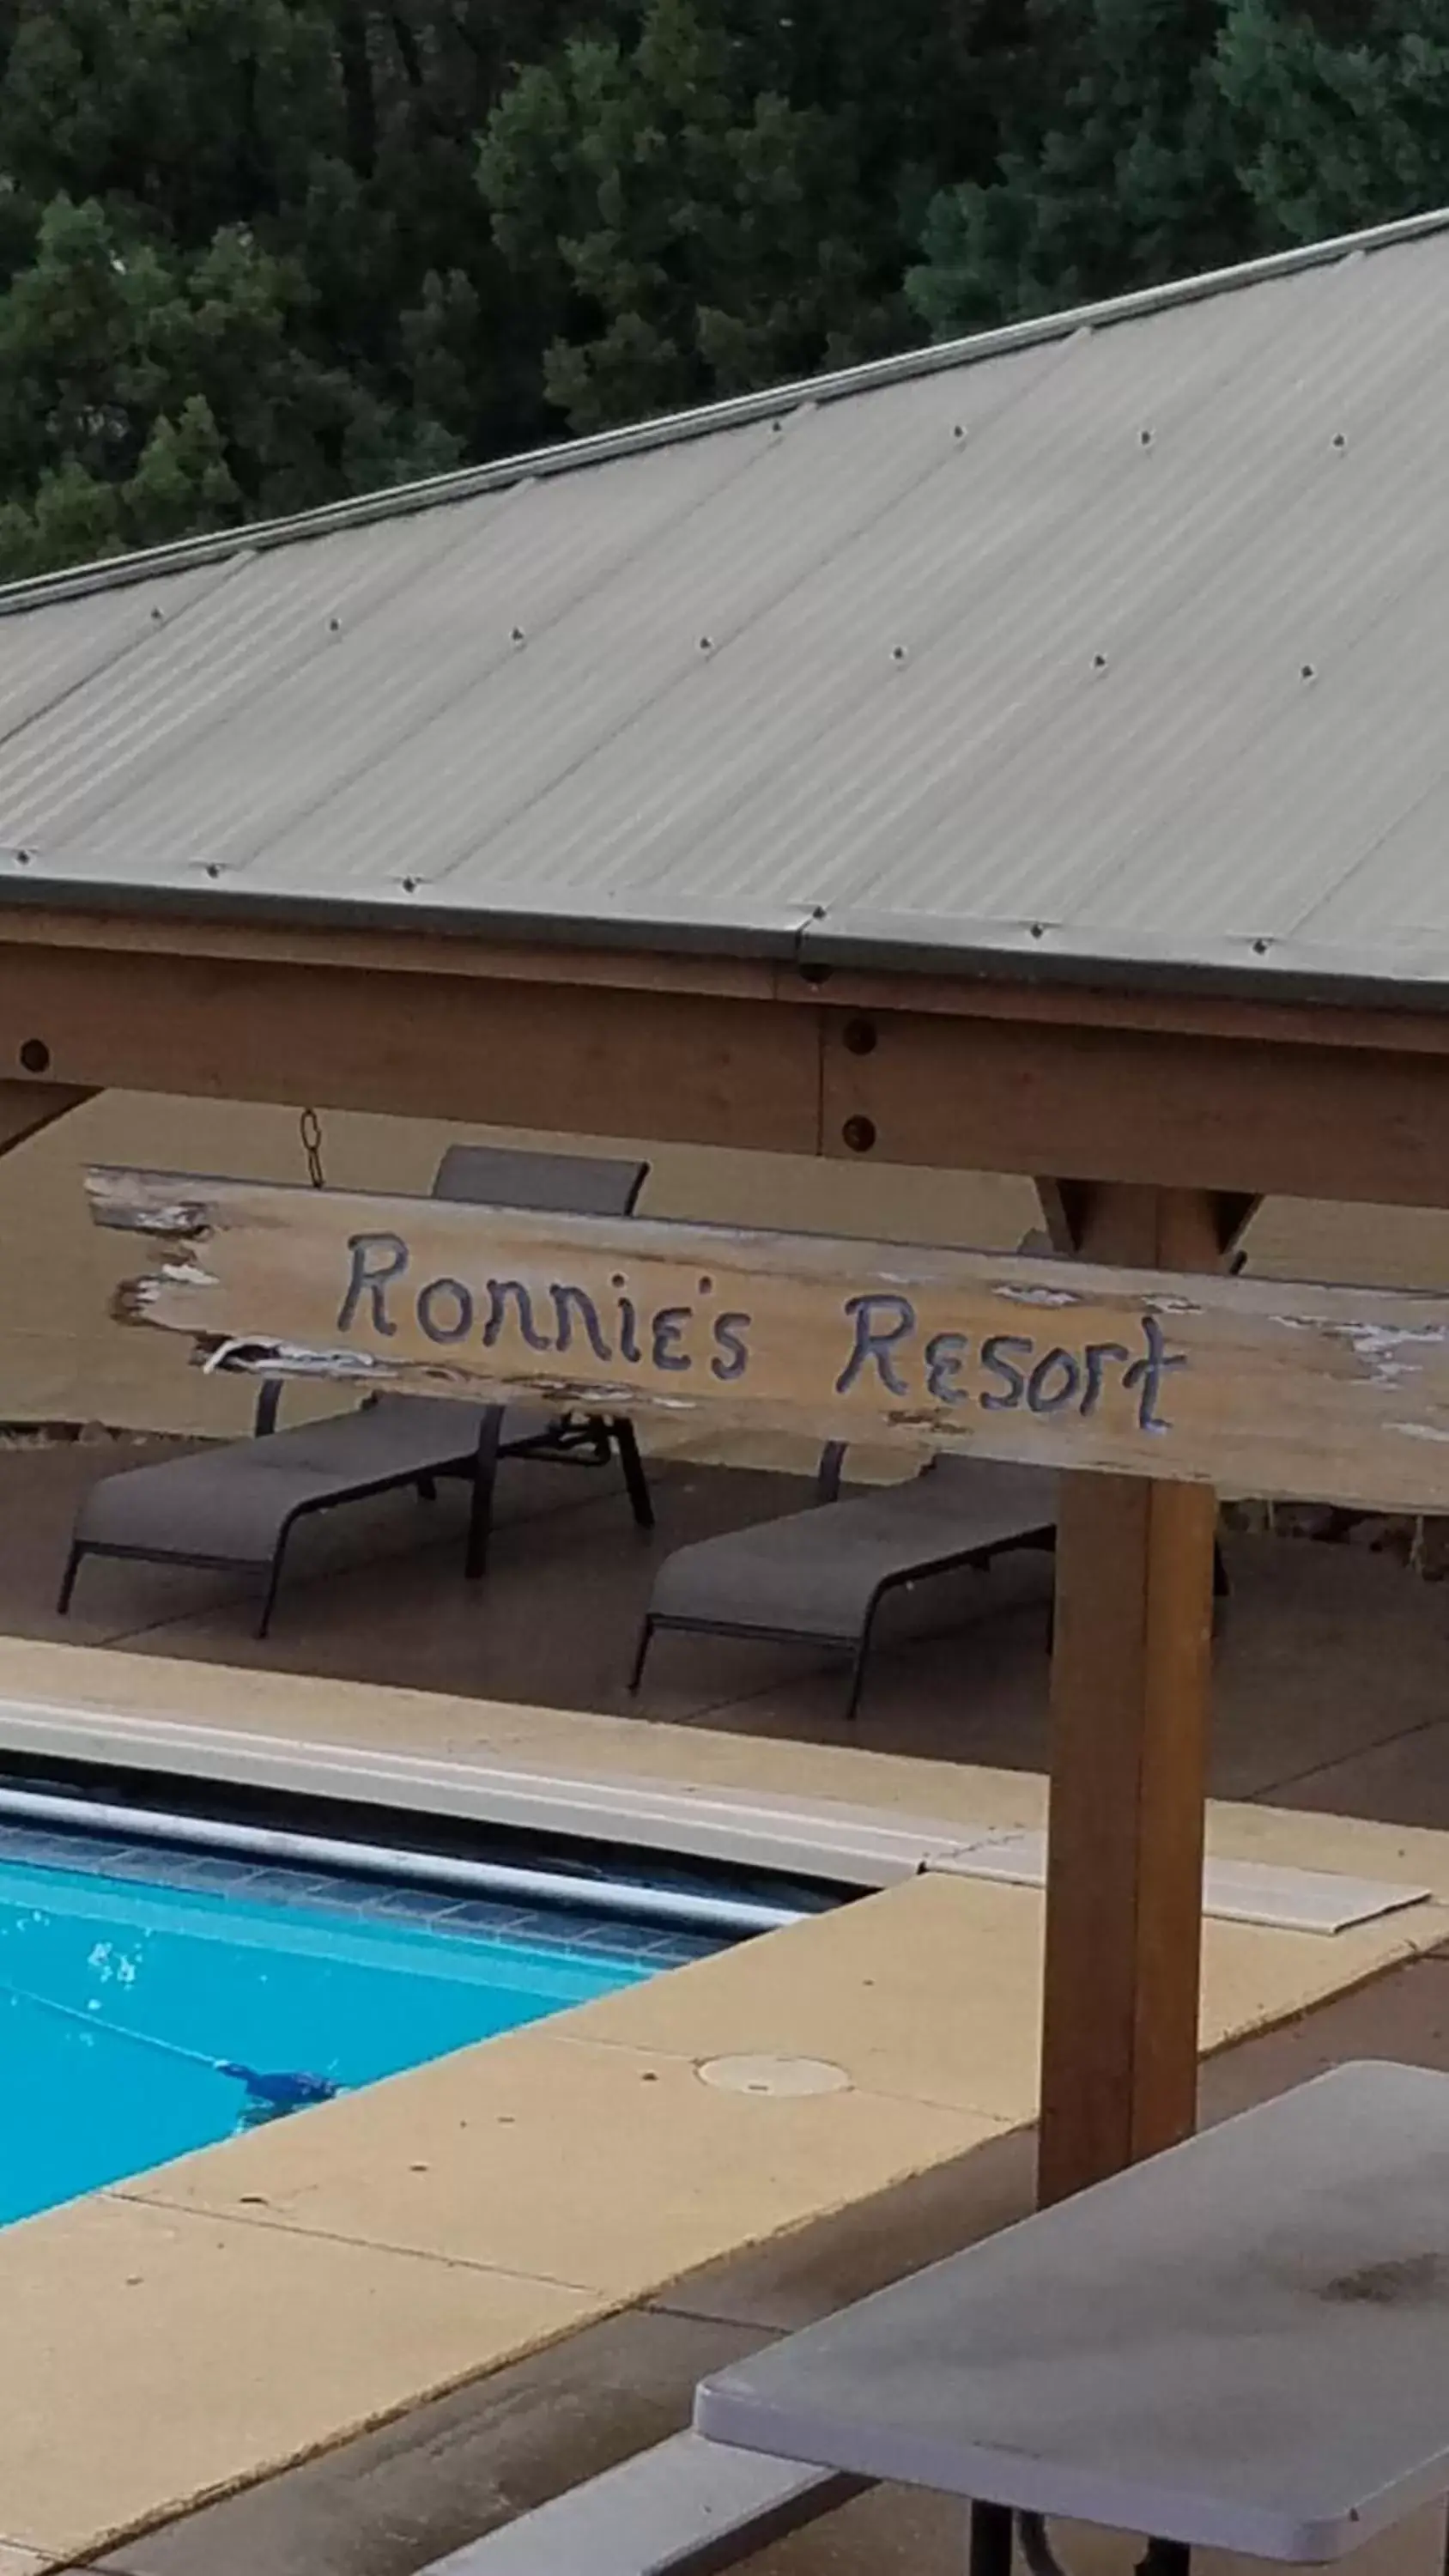 Property logo or sign in Ronnie's Resort